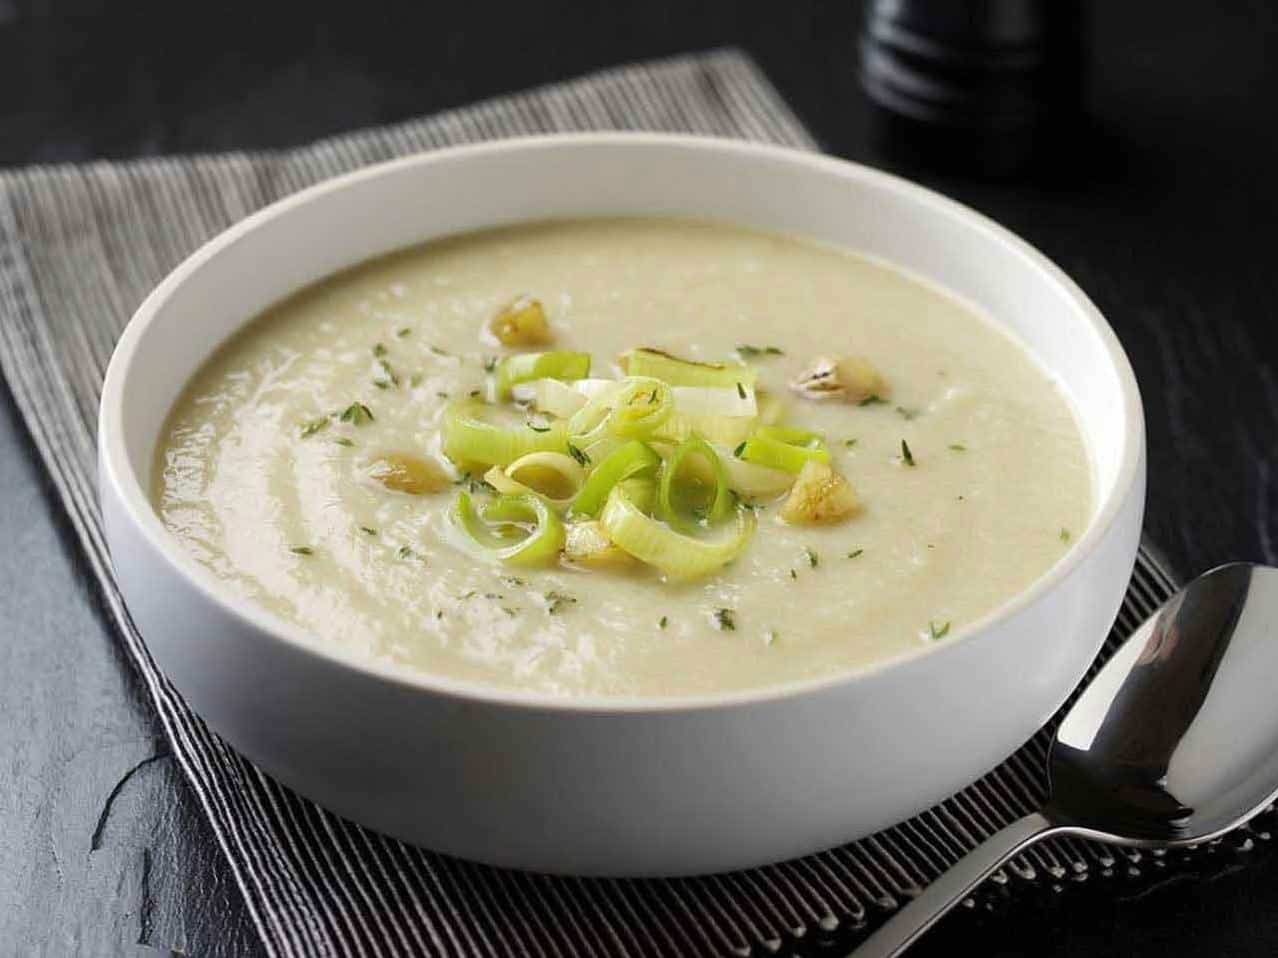  A perfect blend of earthy flavors from leeks and chestnuts in this soup.